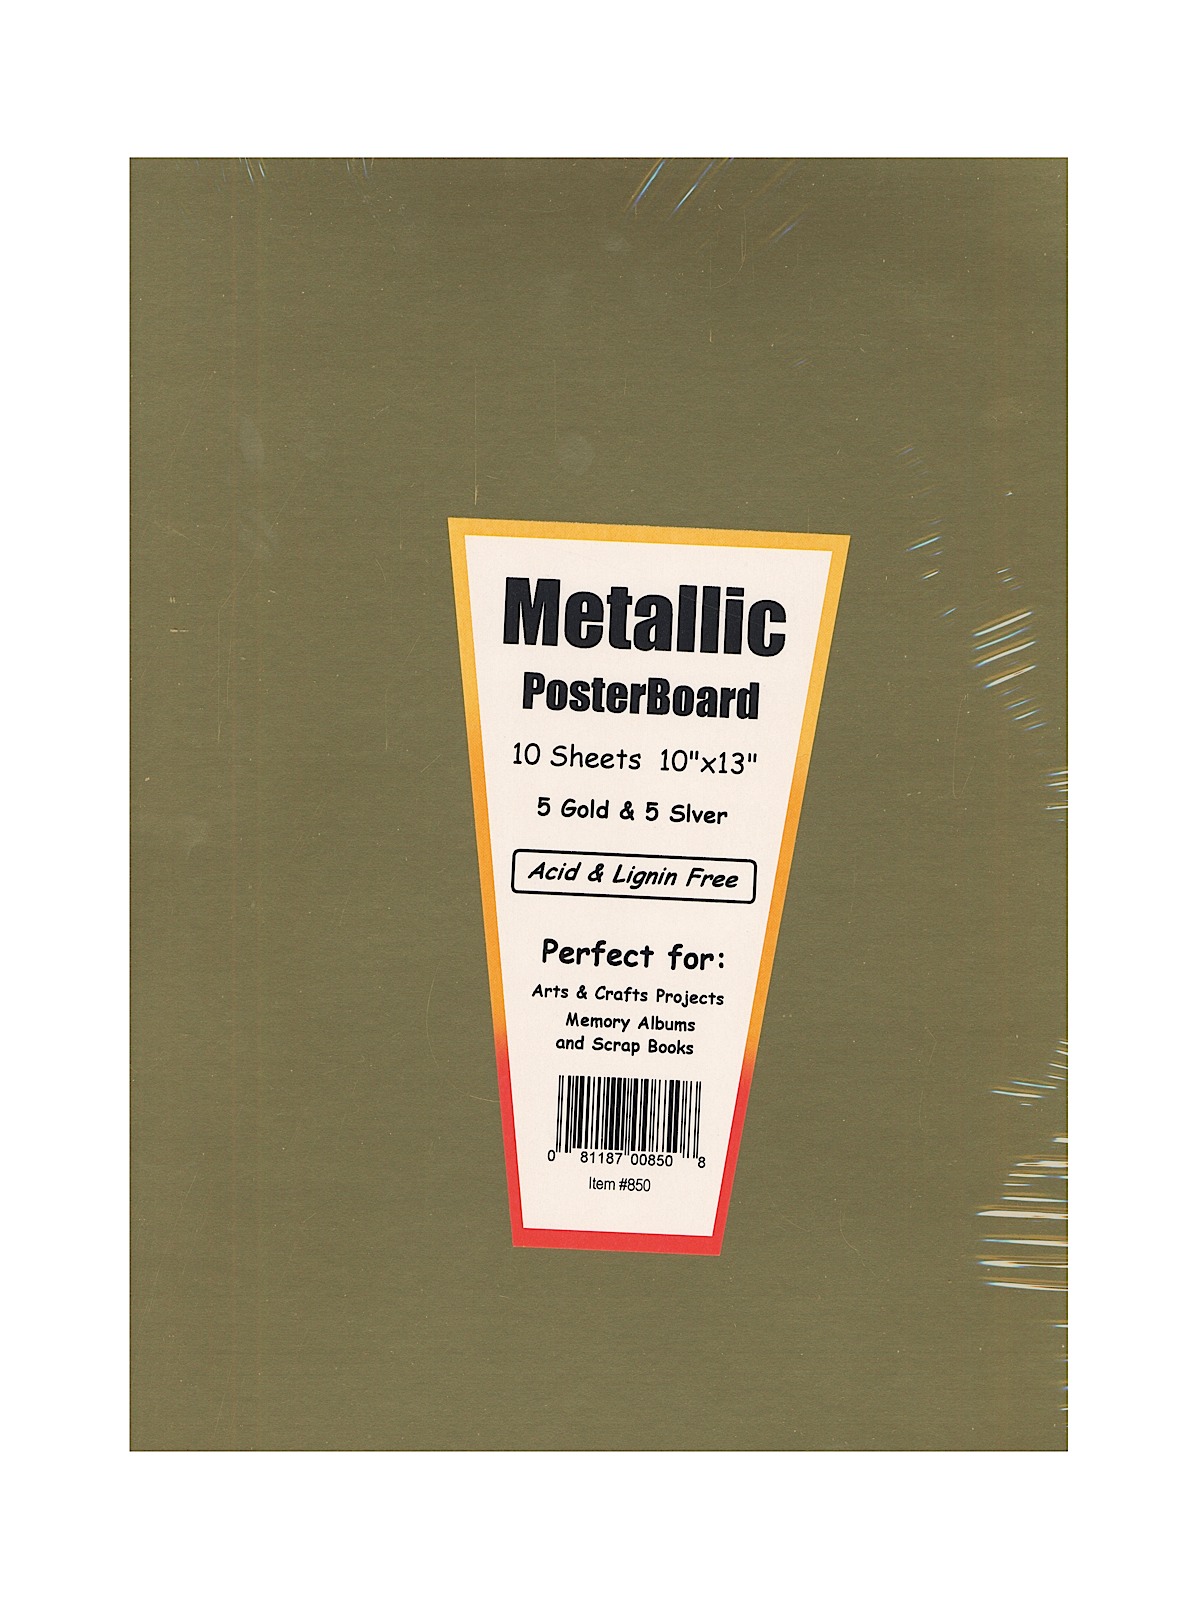 Metallic Foil Board gold and silver 10 in. x 13 in.